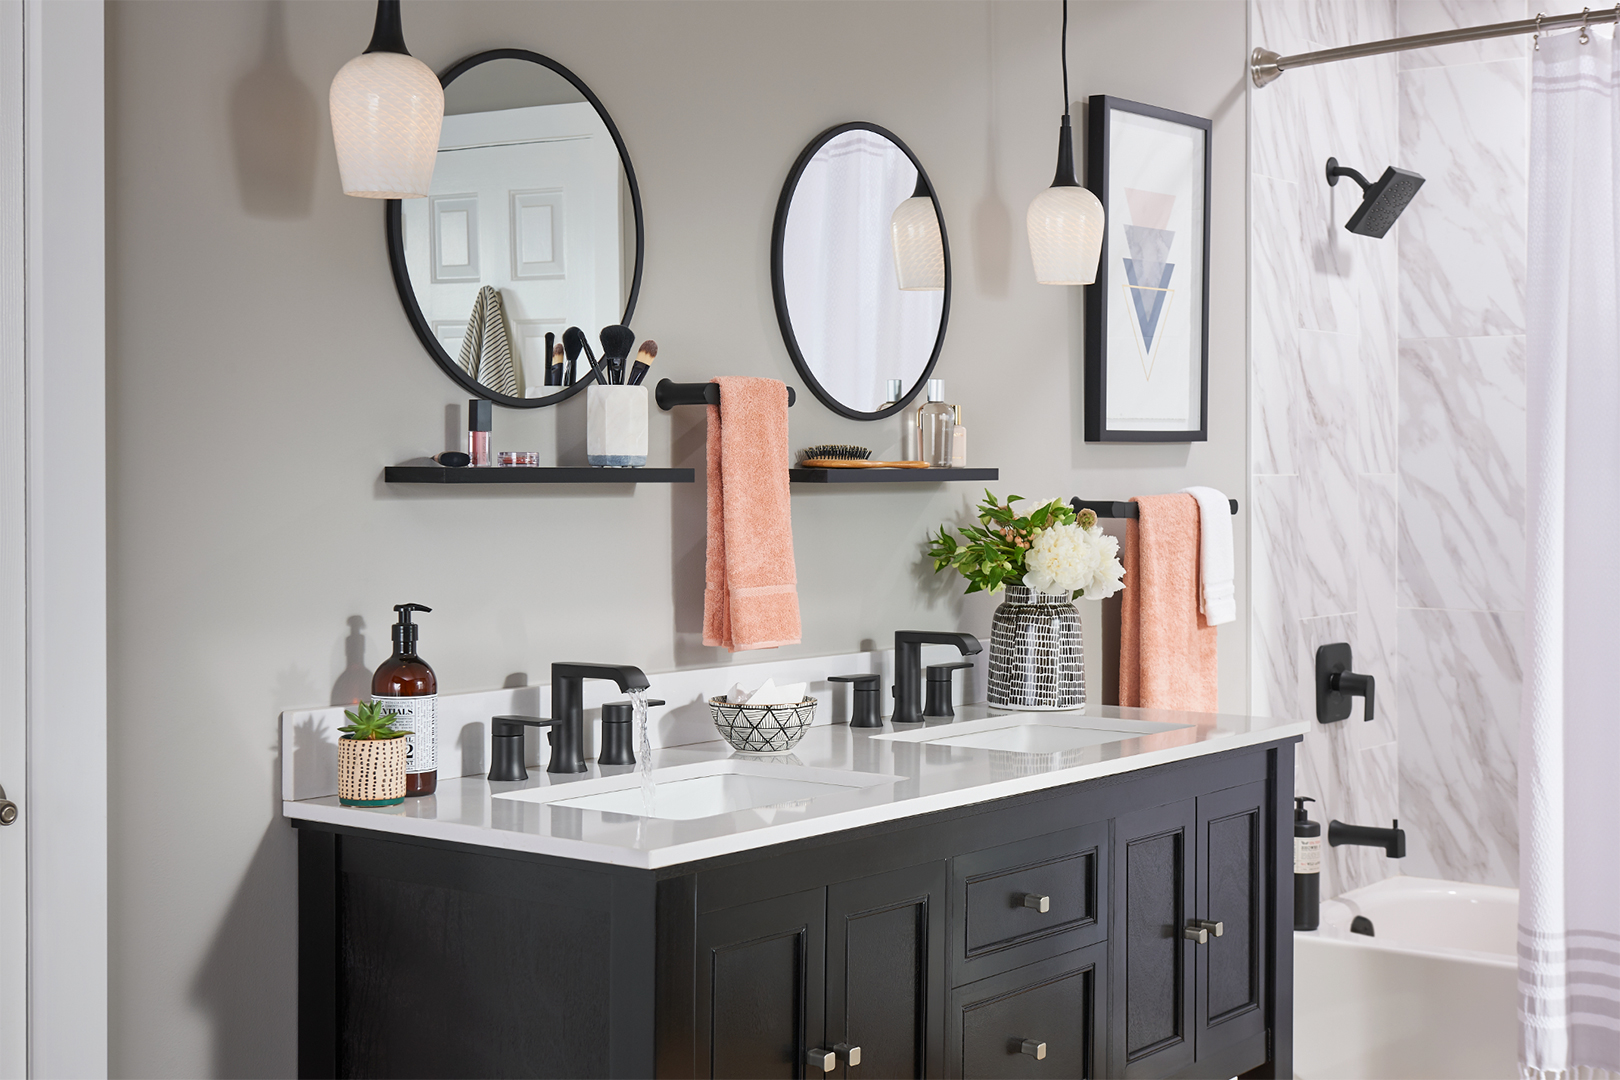 his and her sinks with matching round mirrors and matte black fixtures